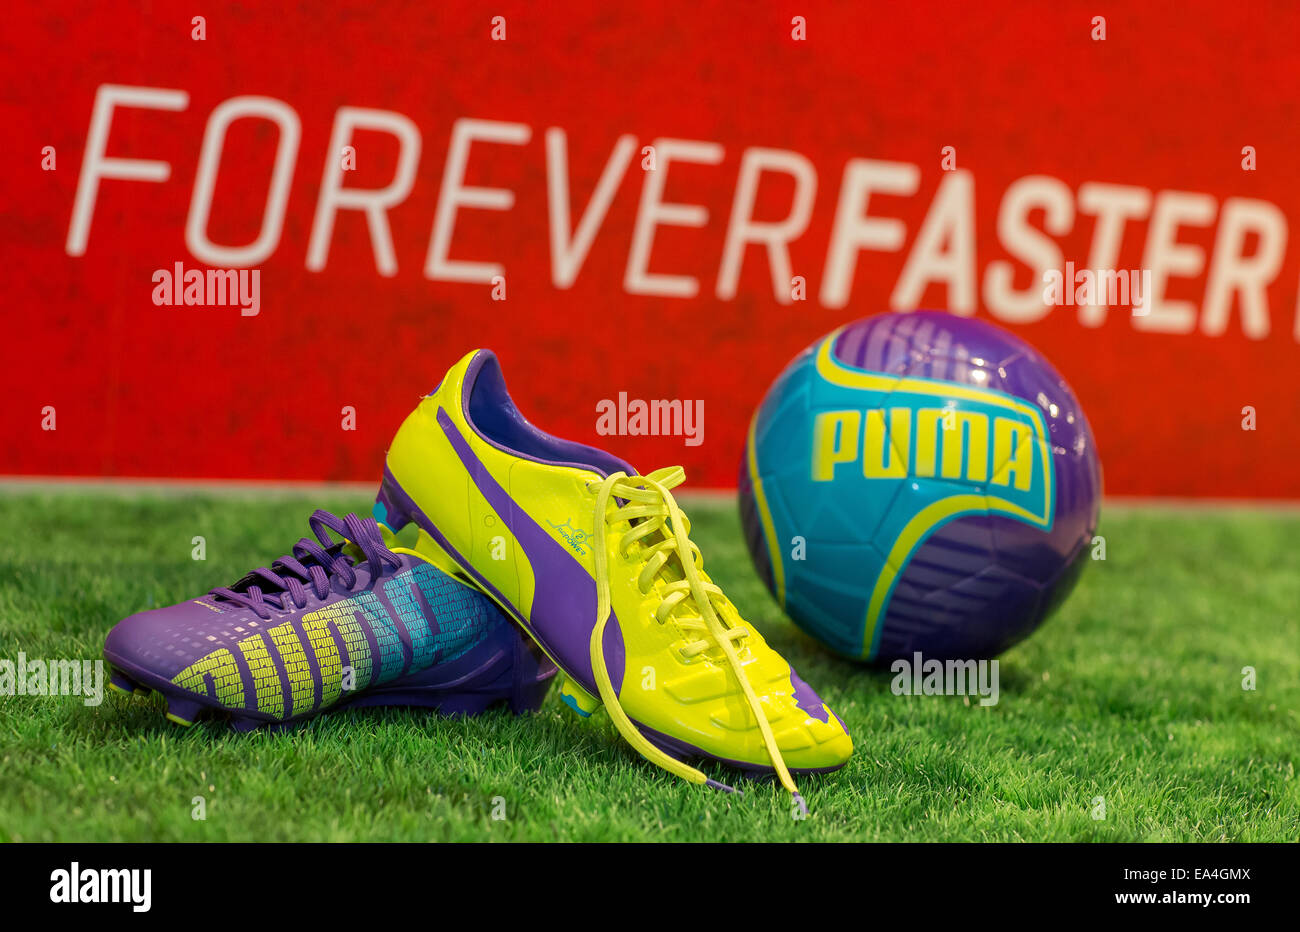 PUMA football boot evoSPEED (l.) and football evoPOWER lying together with  a football on the grass with Forever Faster slogan in the background.  COMMERCIAL HANDOUT/EDITORIAL USE ONLY/NO SALES. Please quote the source "